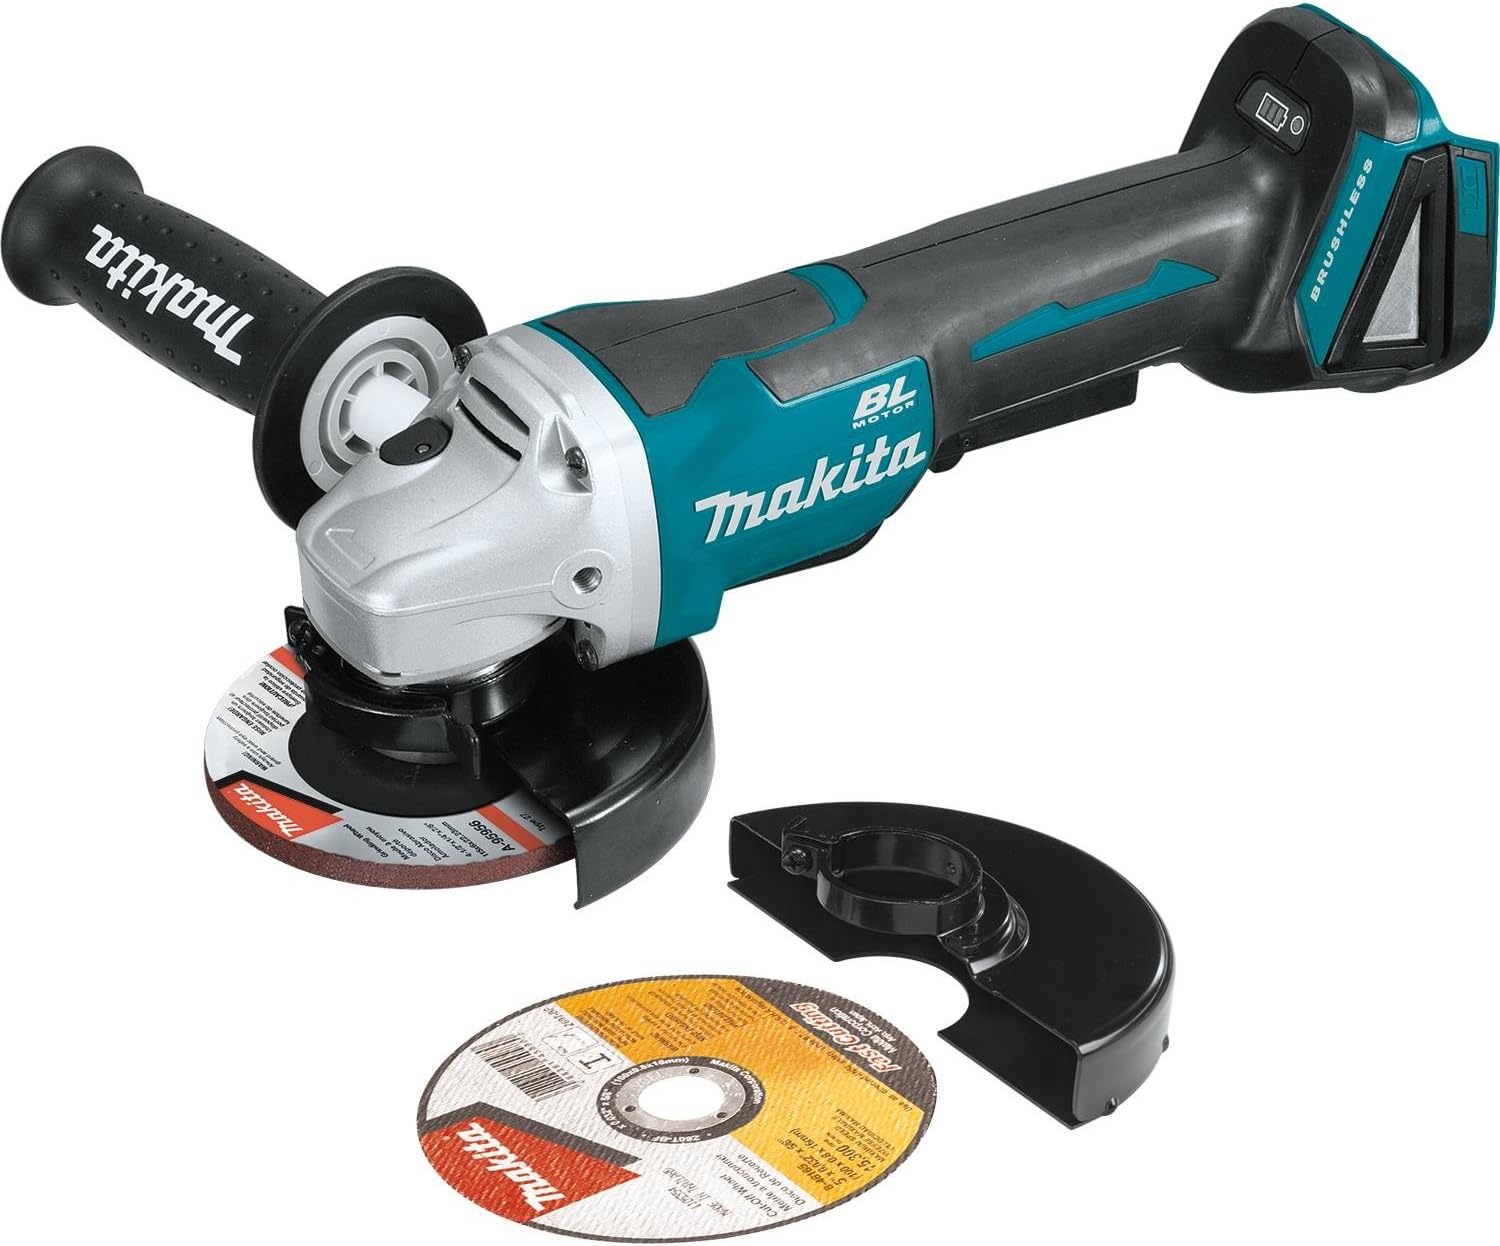 Makita XAG11Z 18V LXT® Lithium-Ion Brushless Cordless 4-1/2” / 5 Paddle Switch Cut-Off/Angle Grinder, with Electric Brake, Tool Only